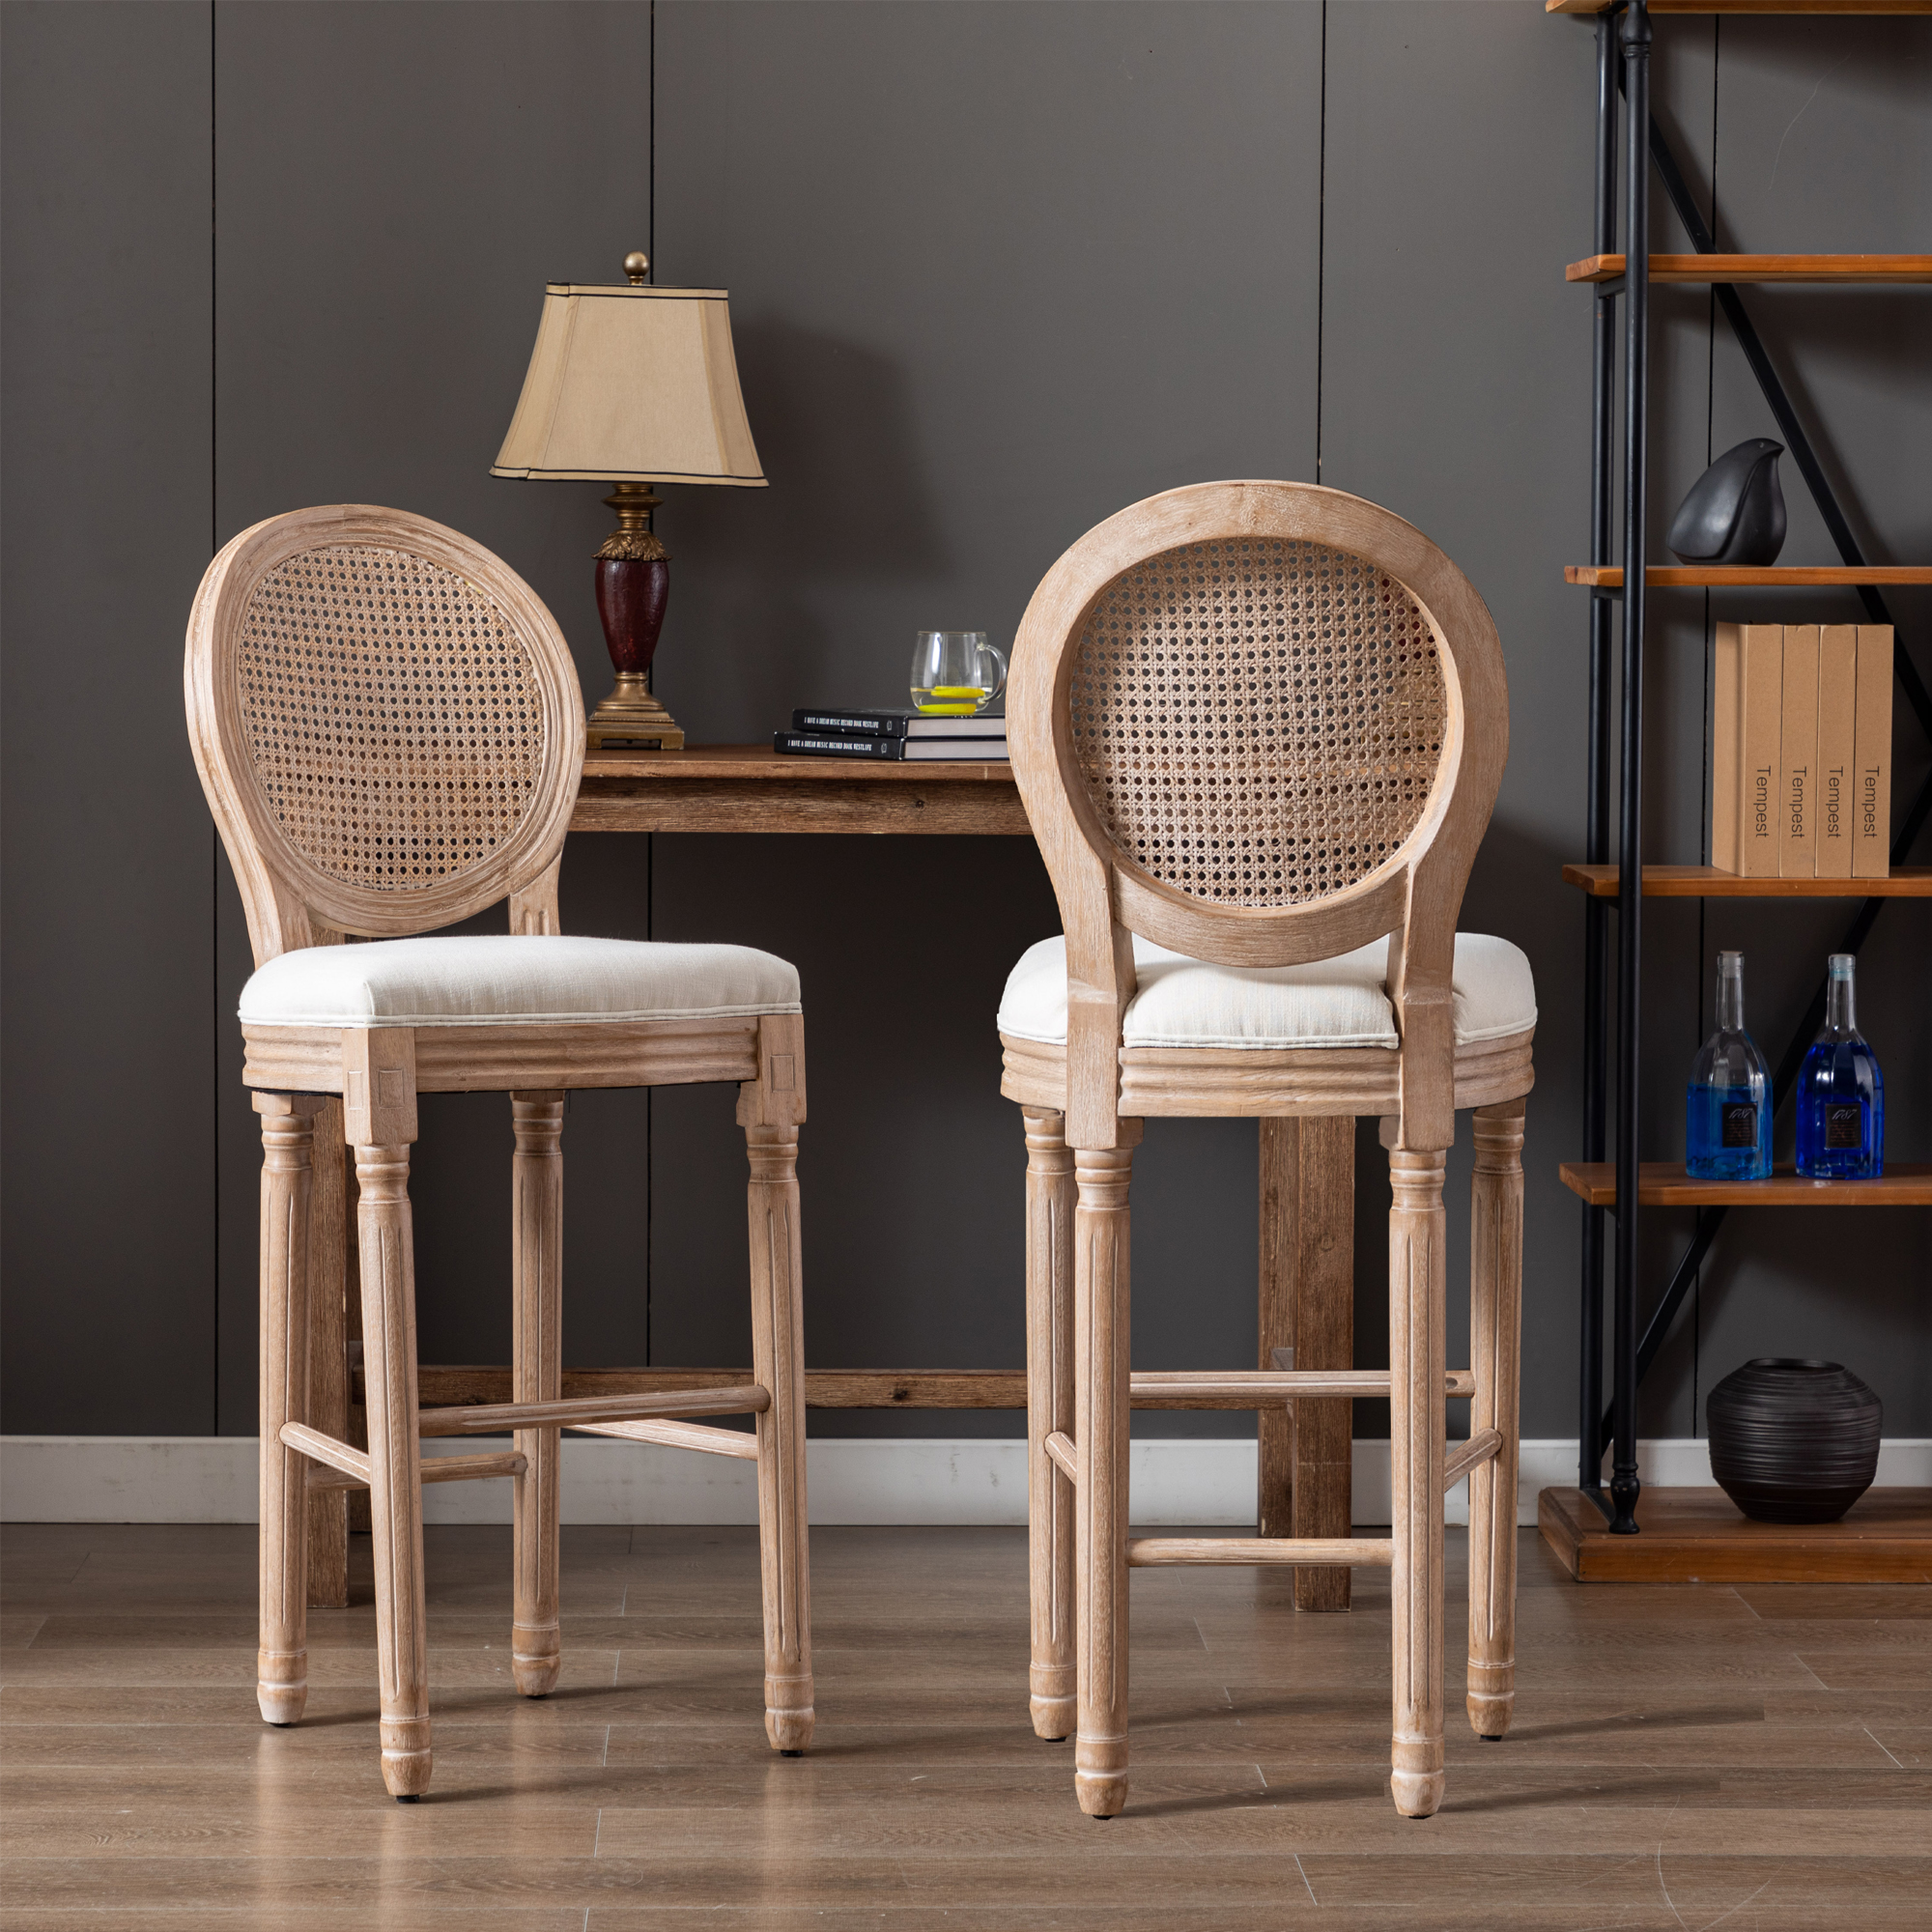 Hengming French Country Wooden Barstools Rattan Back With Upholstered Seating , Beige and Natural ，Set of 2-CASAINC